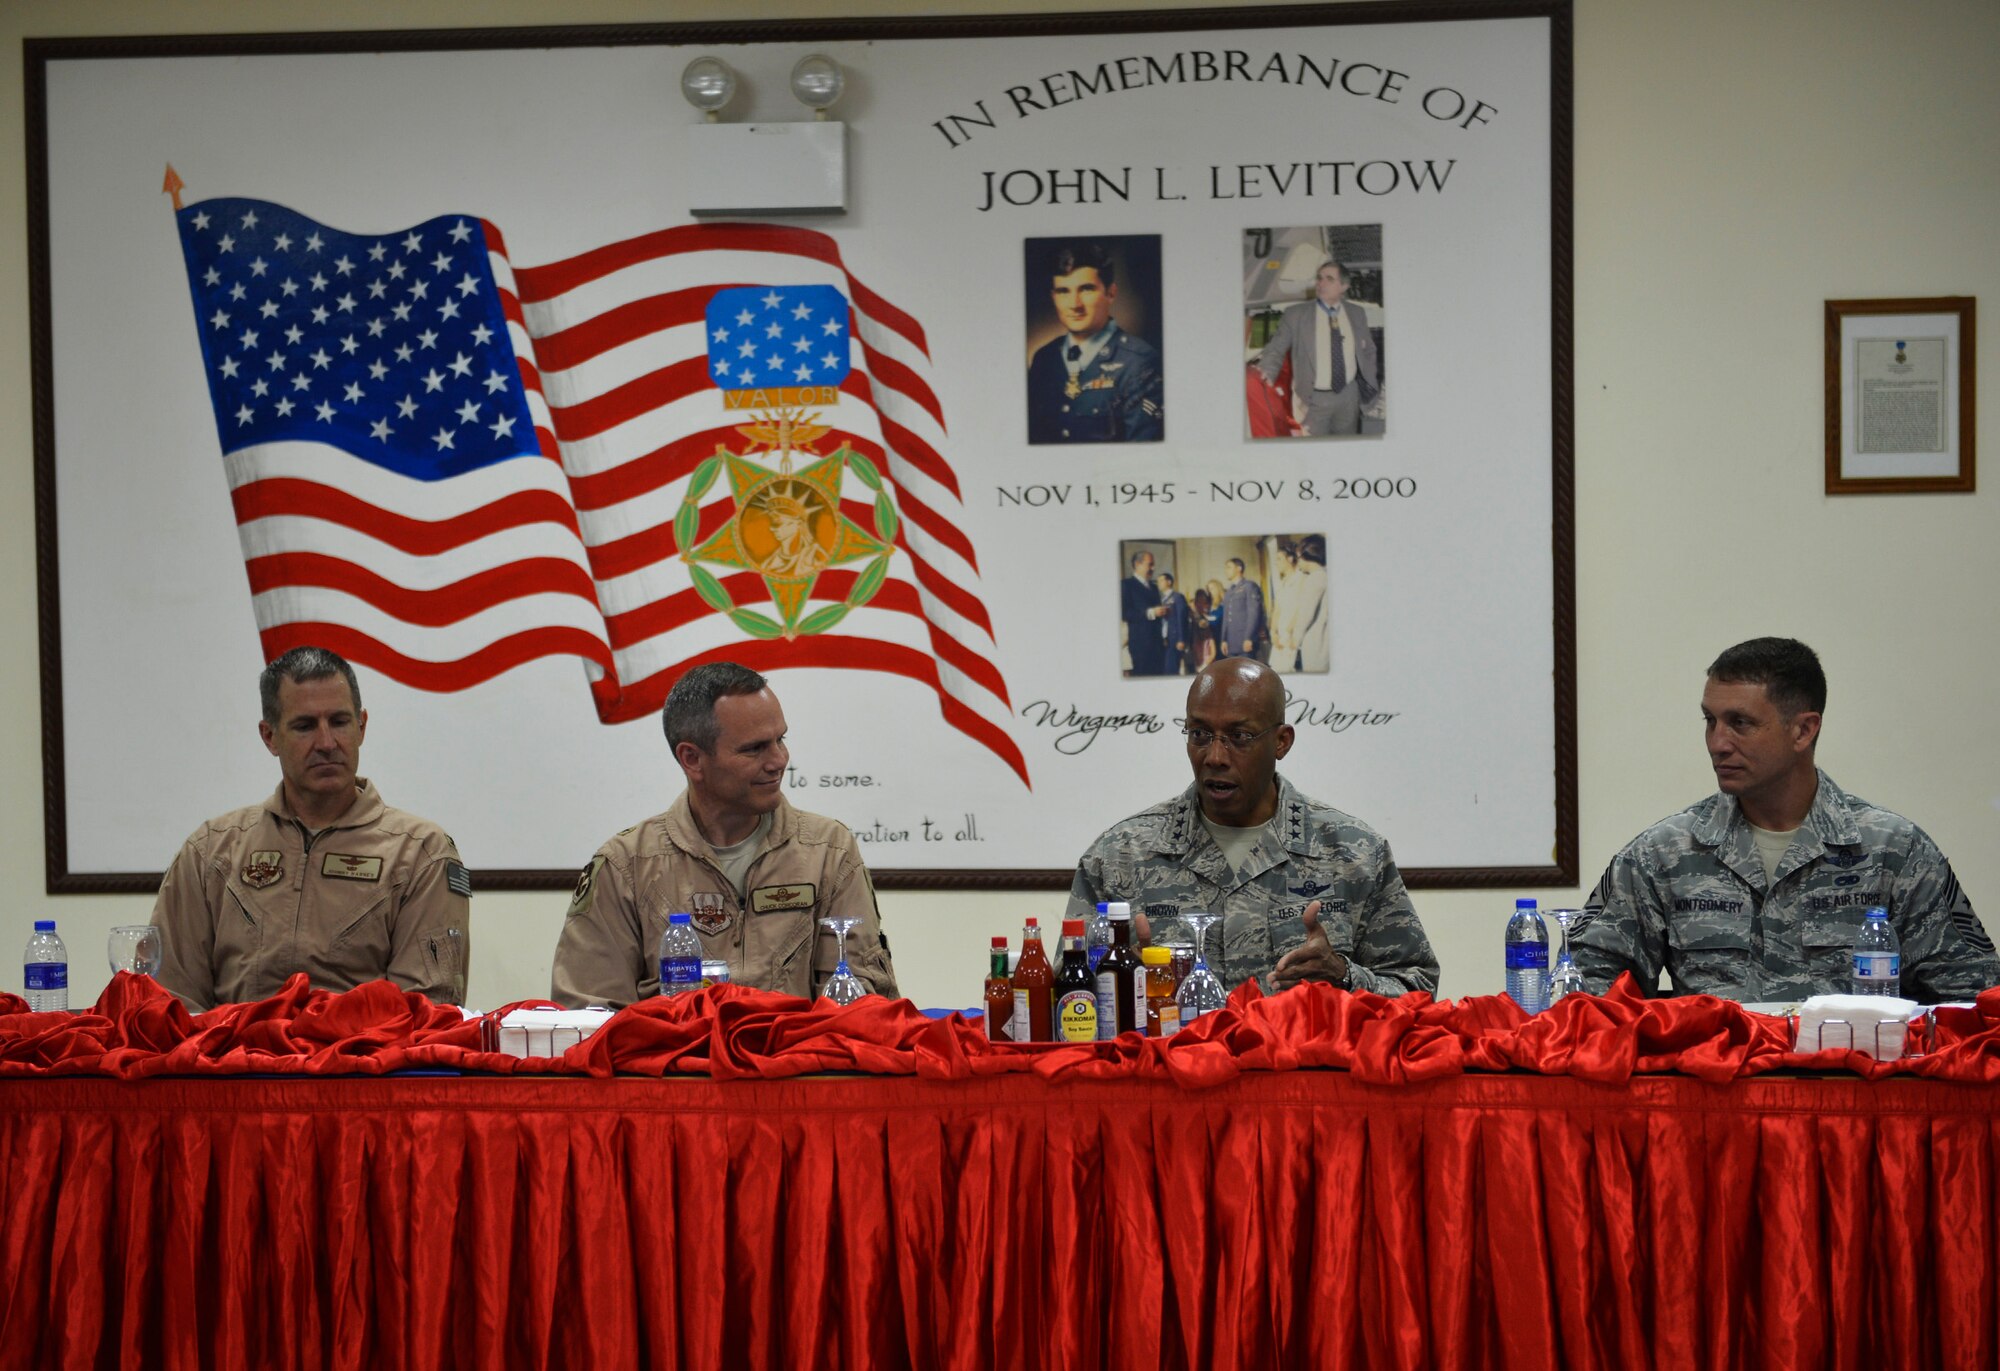 From left, Col. Johnny Barnes, 380th Air Expeditionary Wing vice commander,  Brig. Gen. Charles Corcoran, 380th AEW commander, Lt. Gen. Charles Brown, U.S. Air Forces Central Command commander, and Chief Master Sgt. Joseph Montgomery, AFCENT command chief, speak with members of the 380th AEW during lunch at an undisclosed location in Southwest Asia June 28, 2016. Brown visited the location to interact with members of the wing and to discuss the 380th AEW’s contributions to the AFCENT mission. (U.S. Air Force photo by Tech. Sgt. Chad Warren)